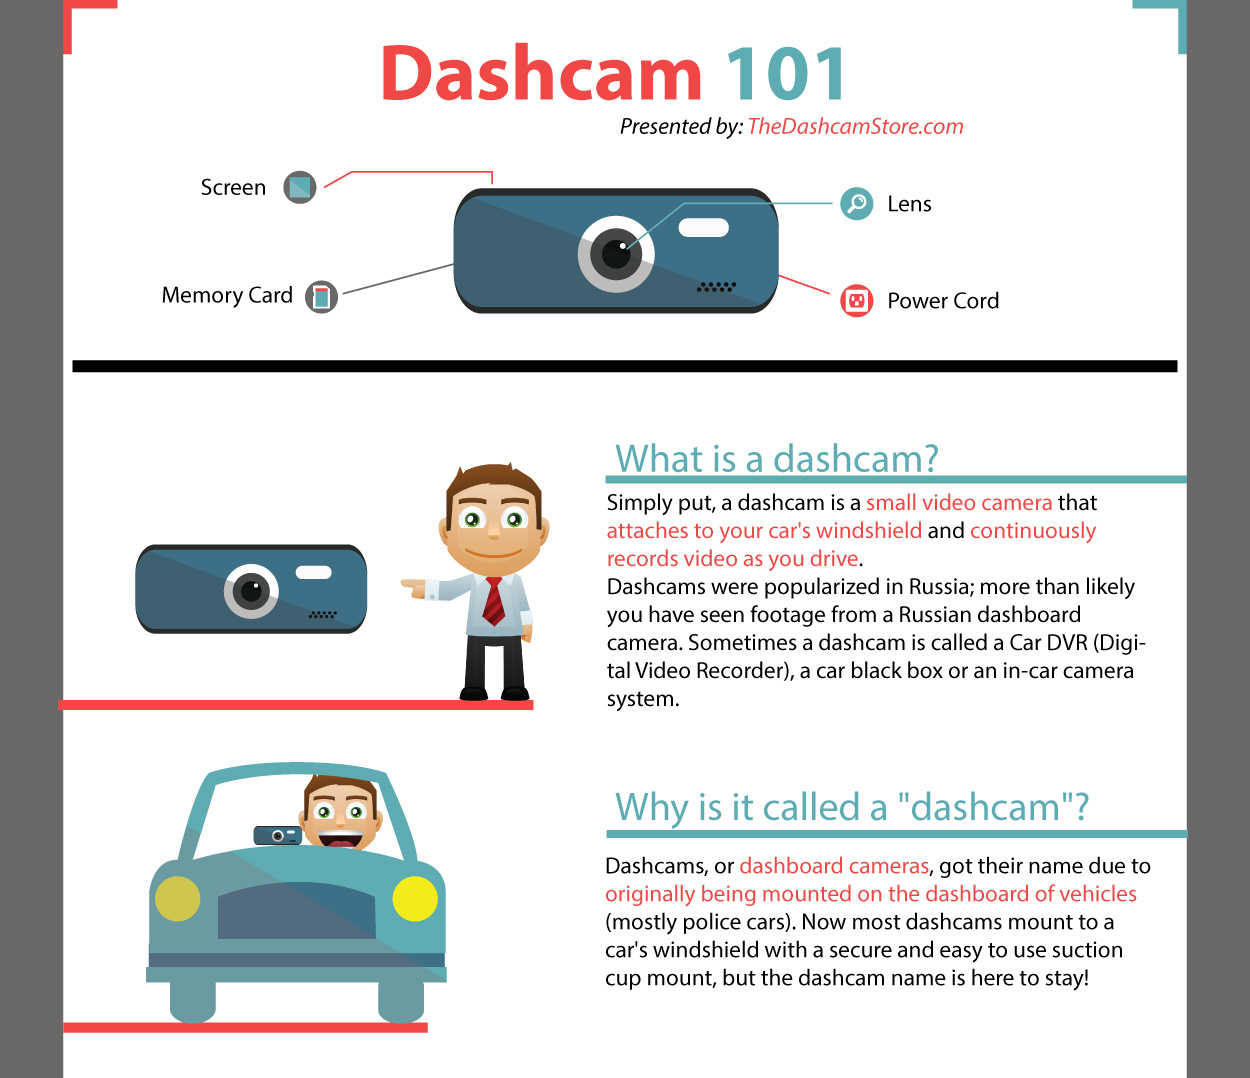 Dashcam 101 Infographic by The Dashcam Store